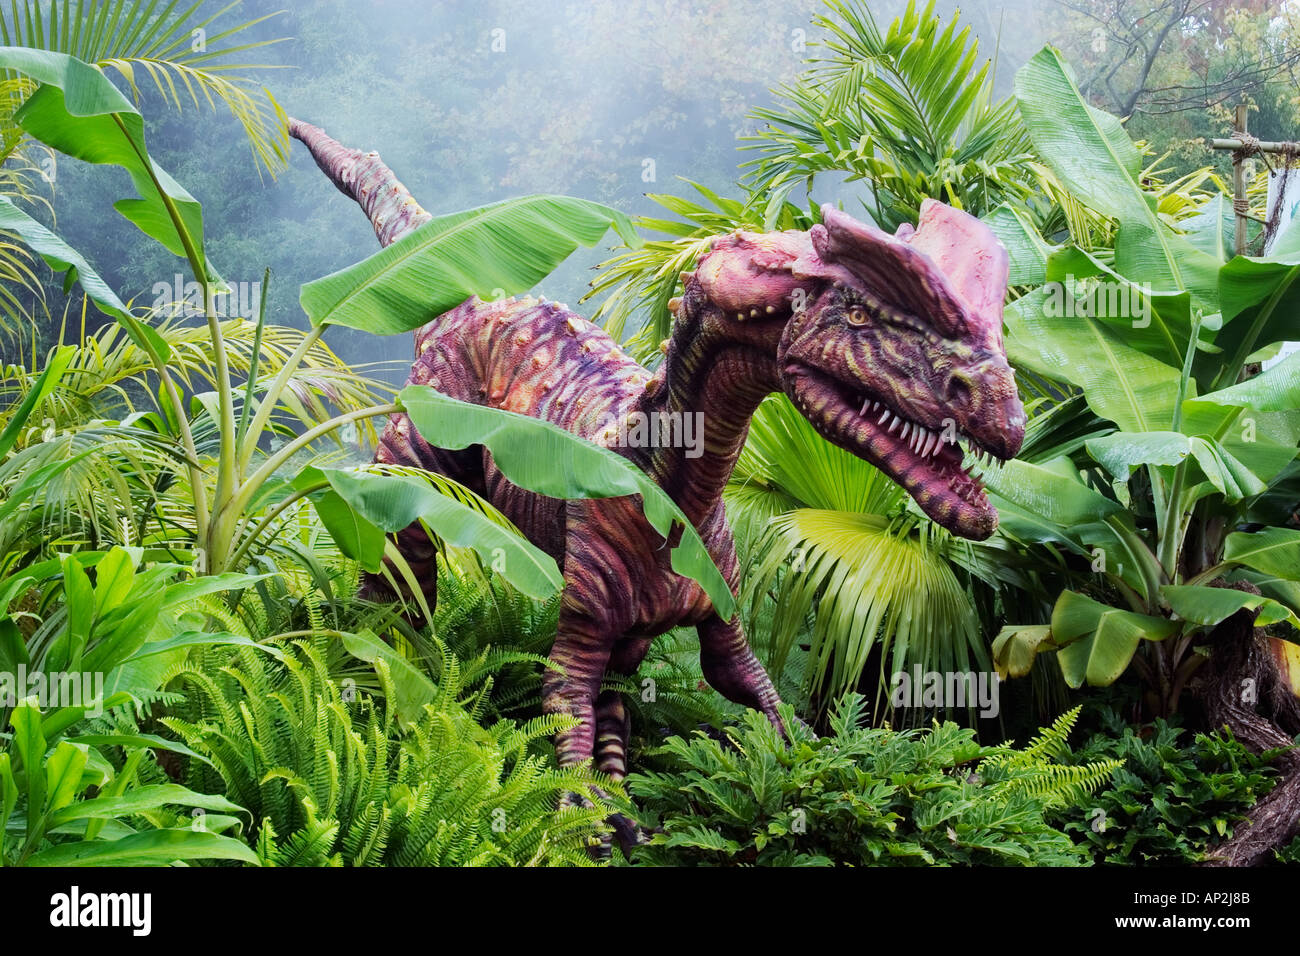 Dilophosaurus which means double crested reptile dinosaur from the early Jurassic period Goes to a length of 20 feet and w Stock Photo